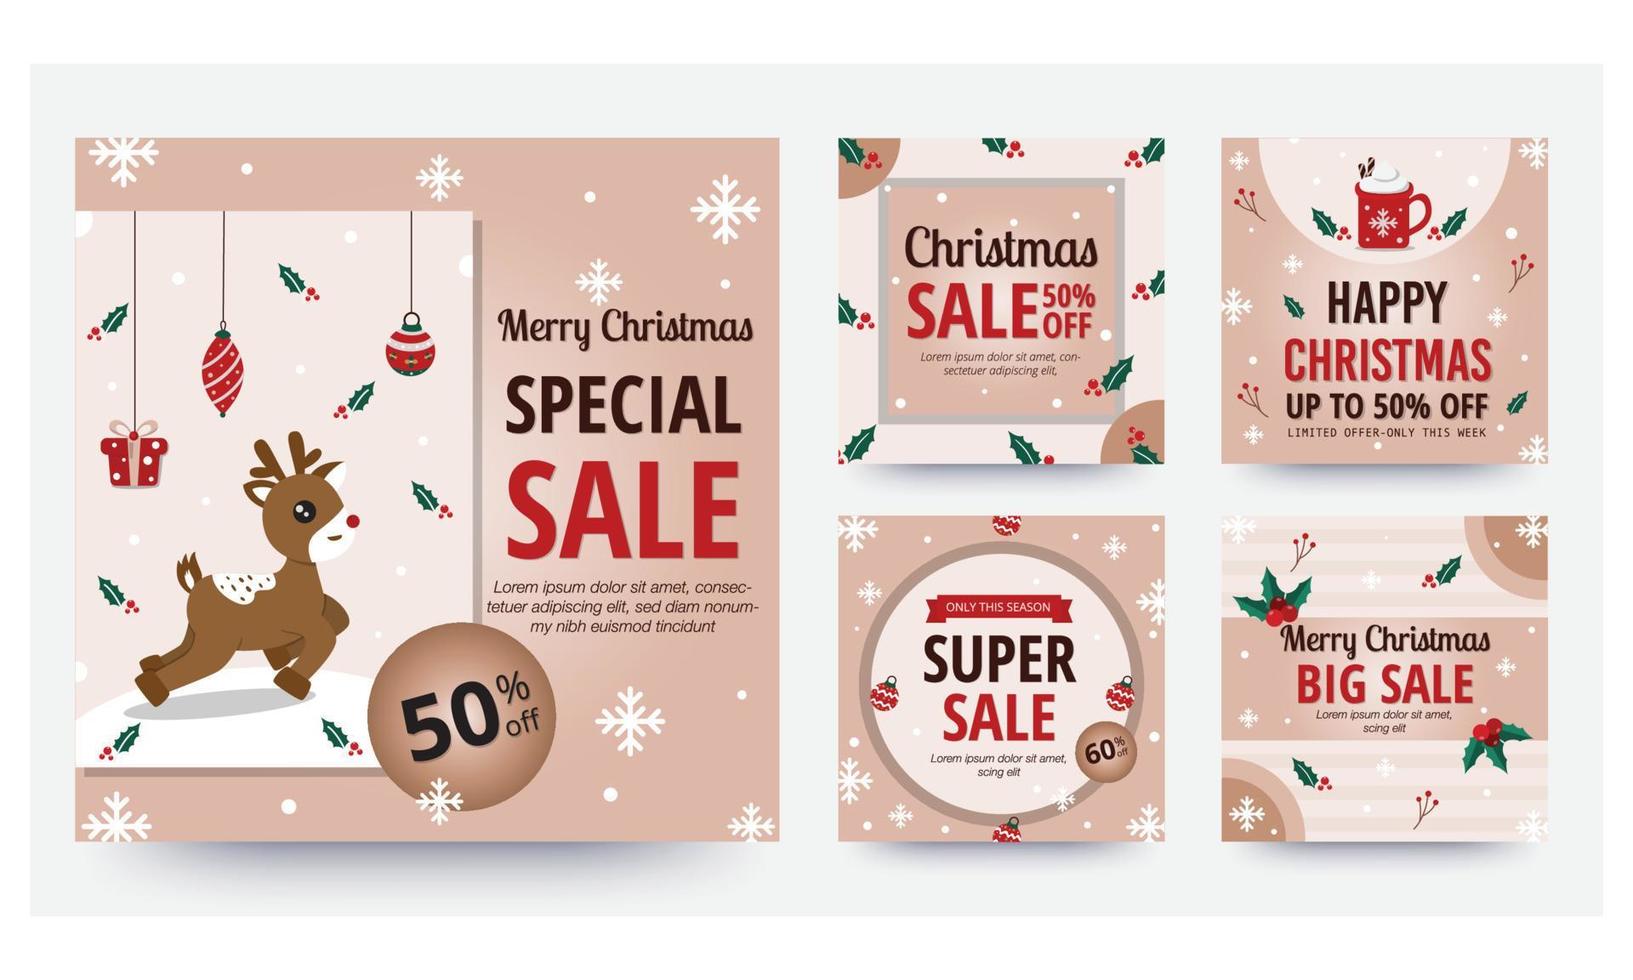 Christmas sale collection design with colorful christmas element. Social media post template. Vector illustration.